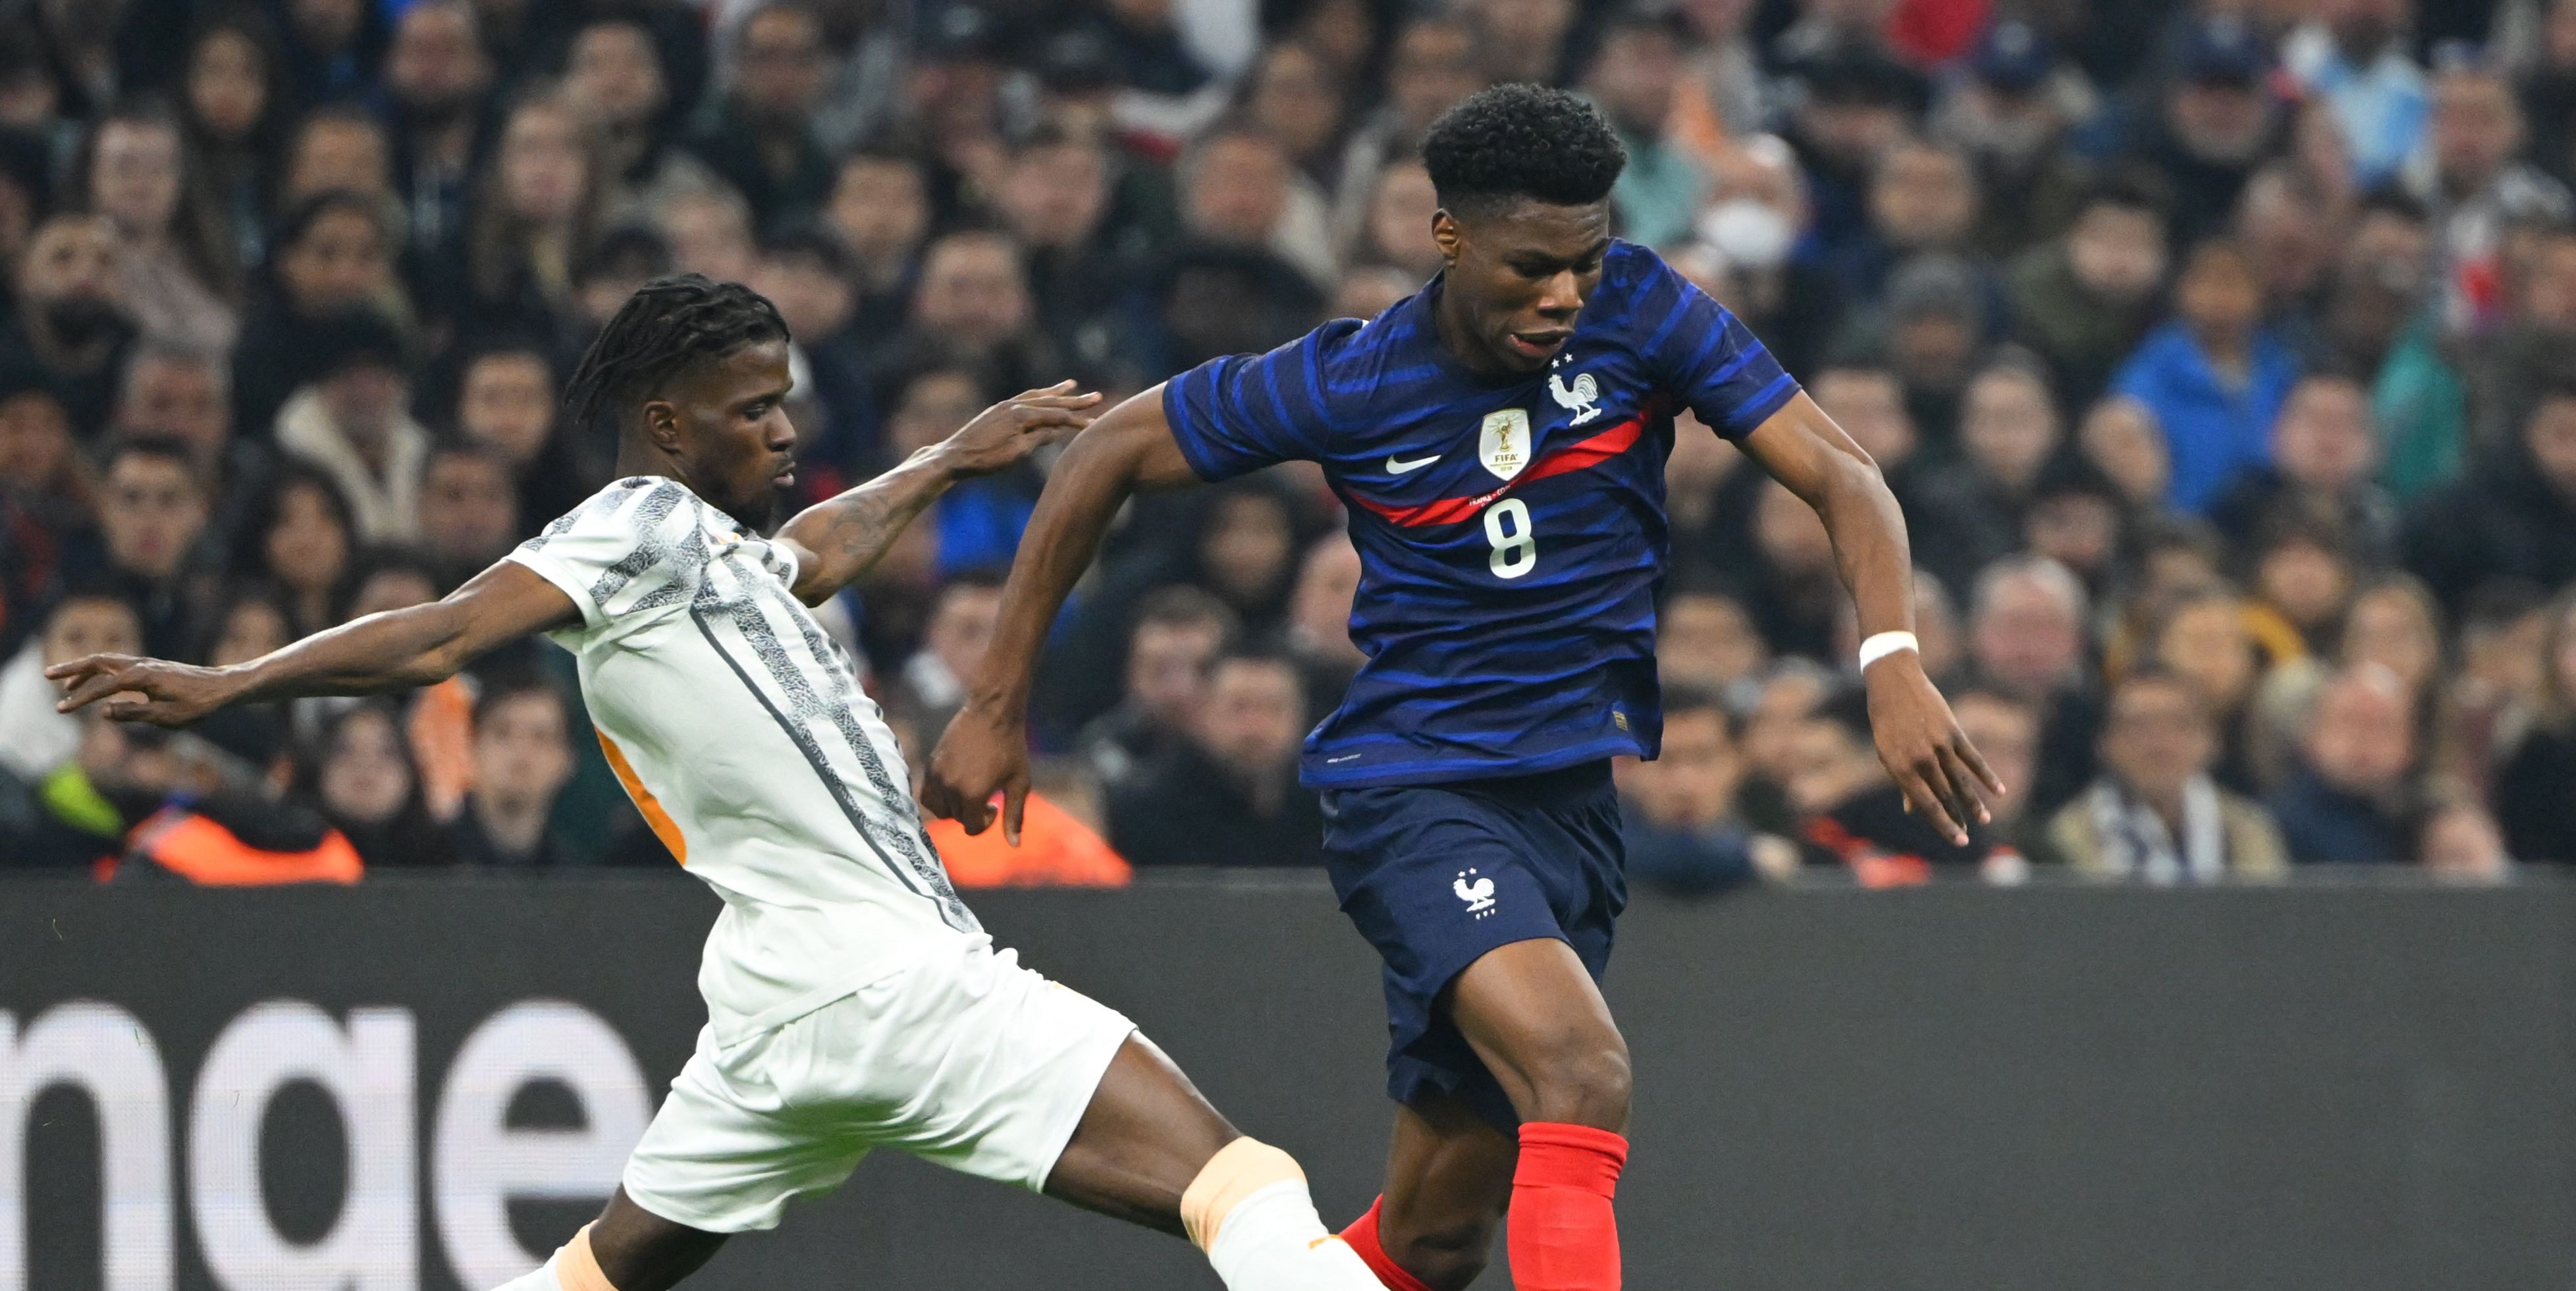 Liverpool ‘in direct contact’ with Tchouameni’s agents as second ‘perfect’ transfer lined up for 2023, says Fabrizio Romano